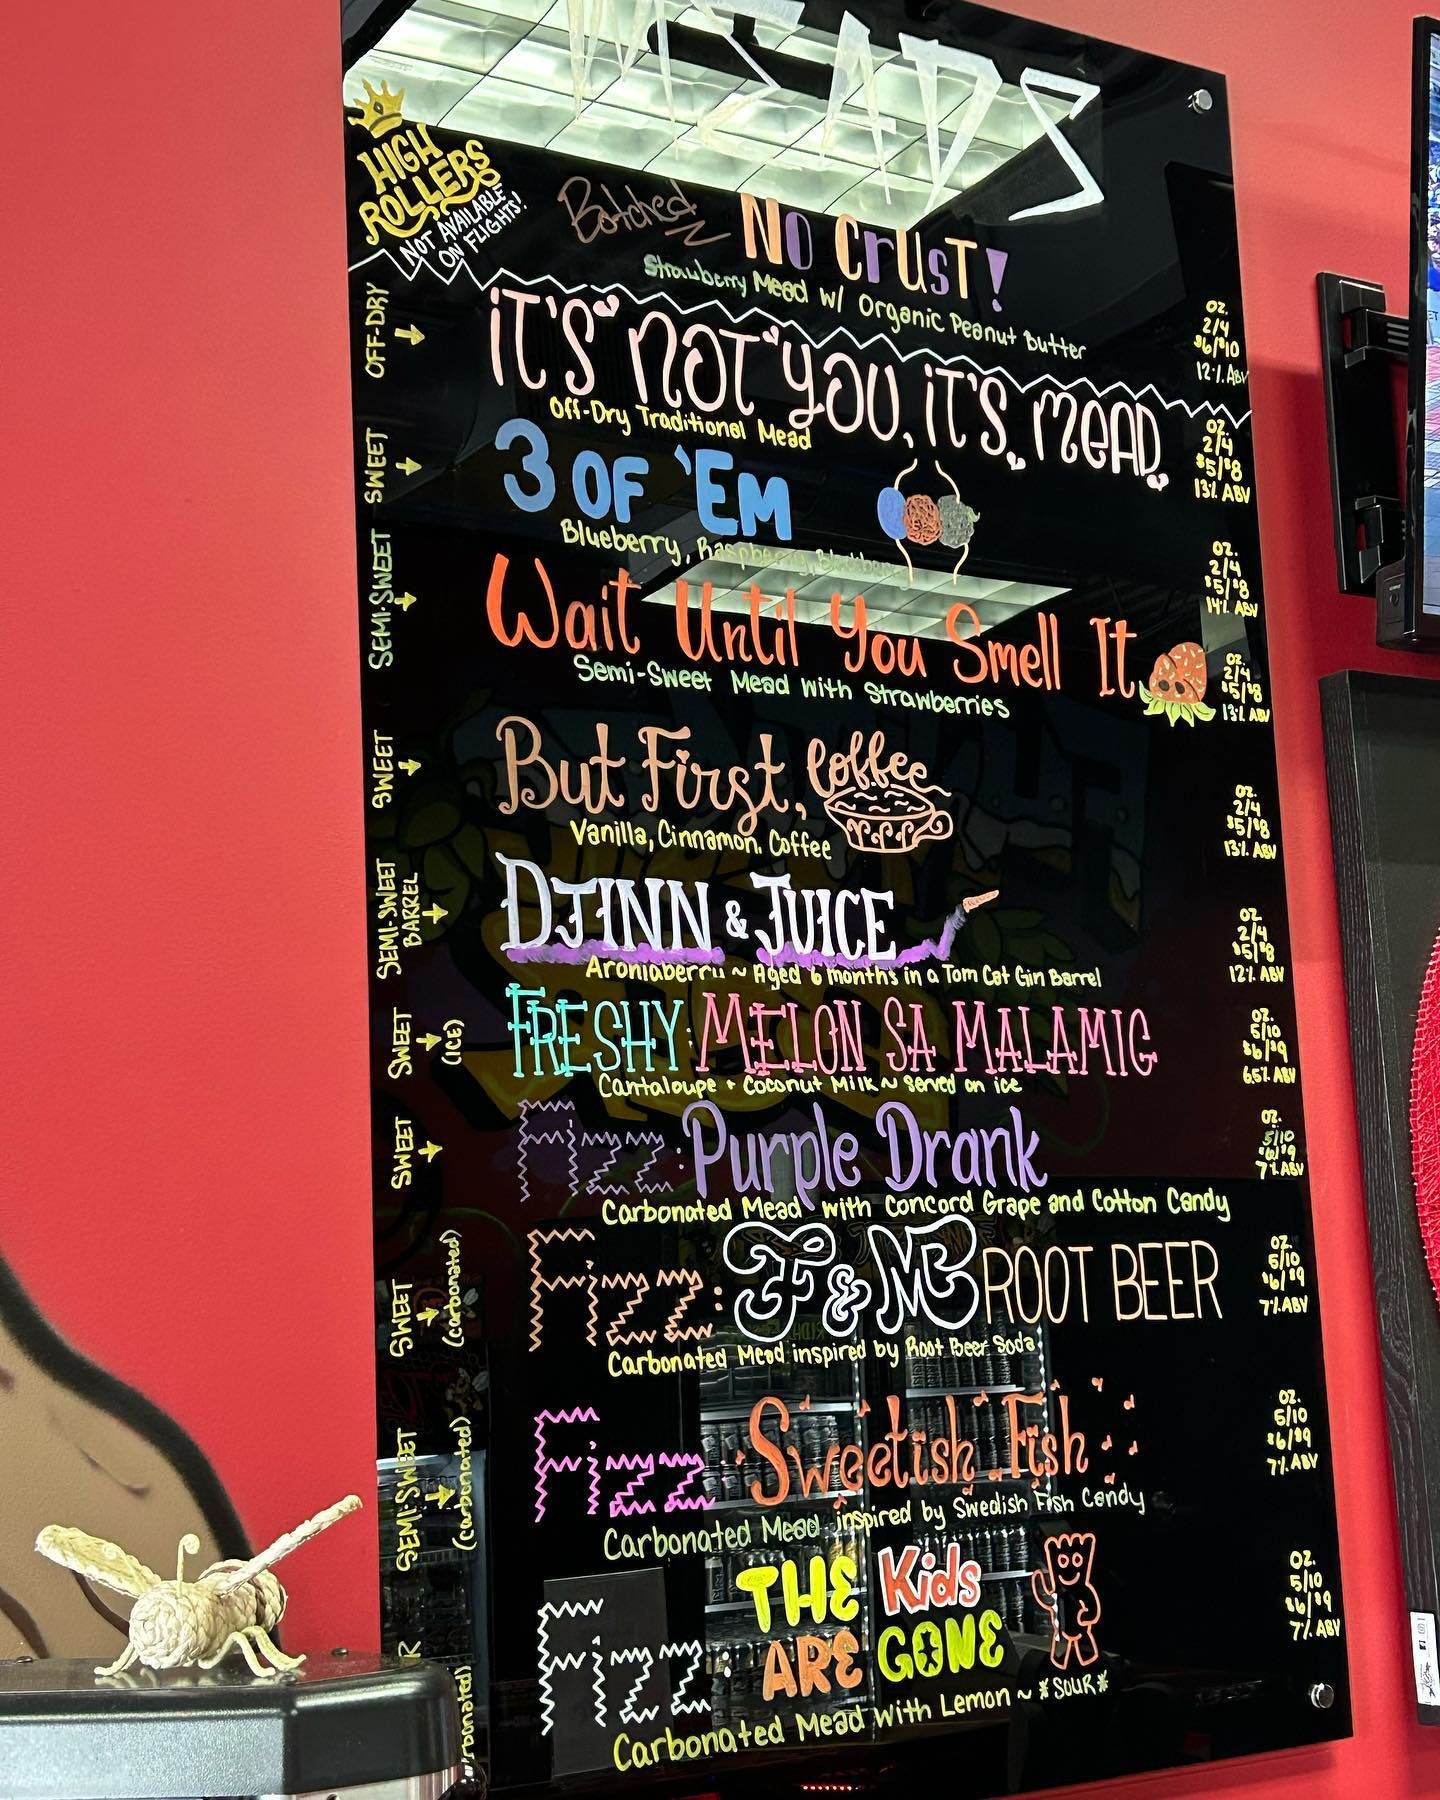 🫵🫵🫵We&rsquo;ve got some crazy good things on tap&hellip;Mead, Beer, Seltzers OH MY!!!

Come join us and take your taste buds on a funky ride!!!

#mead #midlomead #beer #craftbeer #craftmead #rvabeer #rvamead